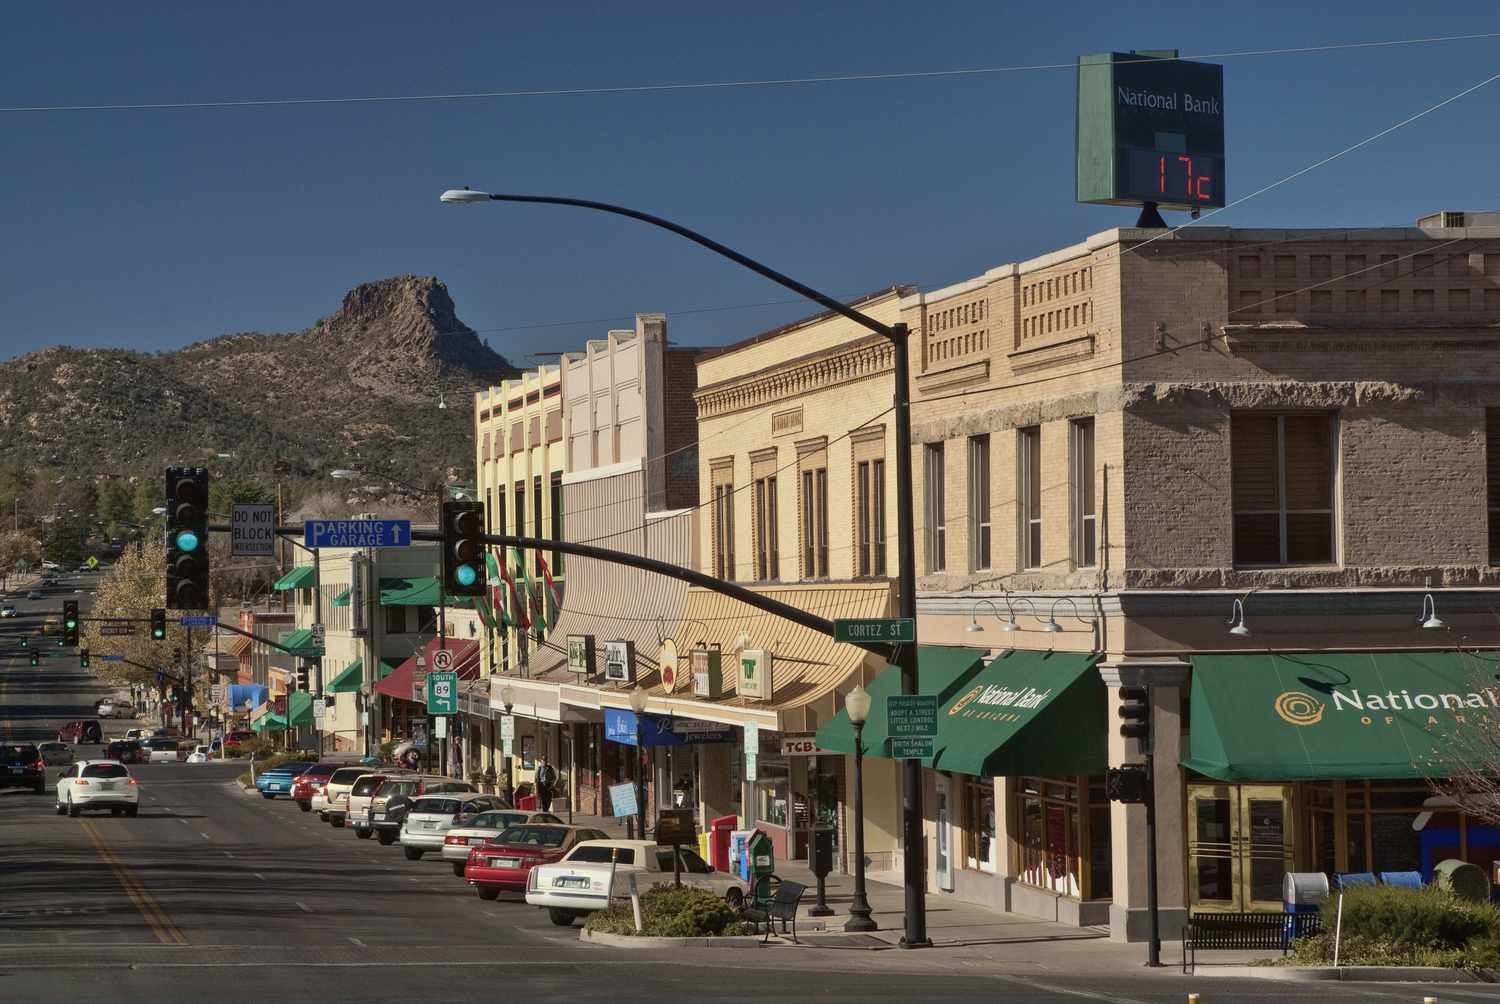 8-facts-about-music-history-in-prescott-arizona